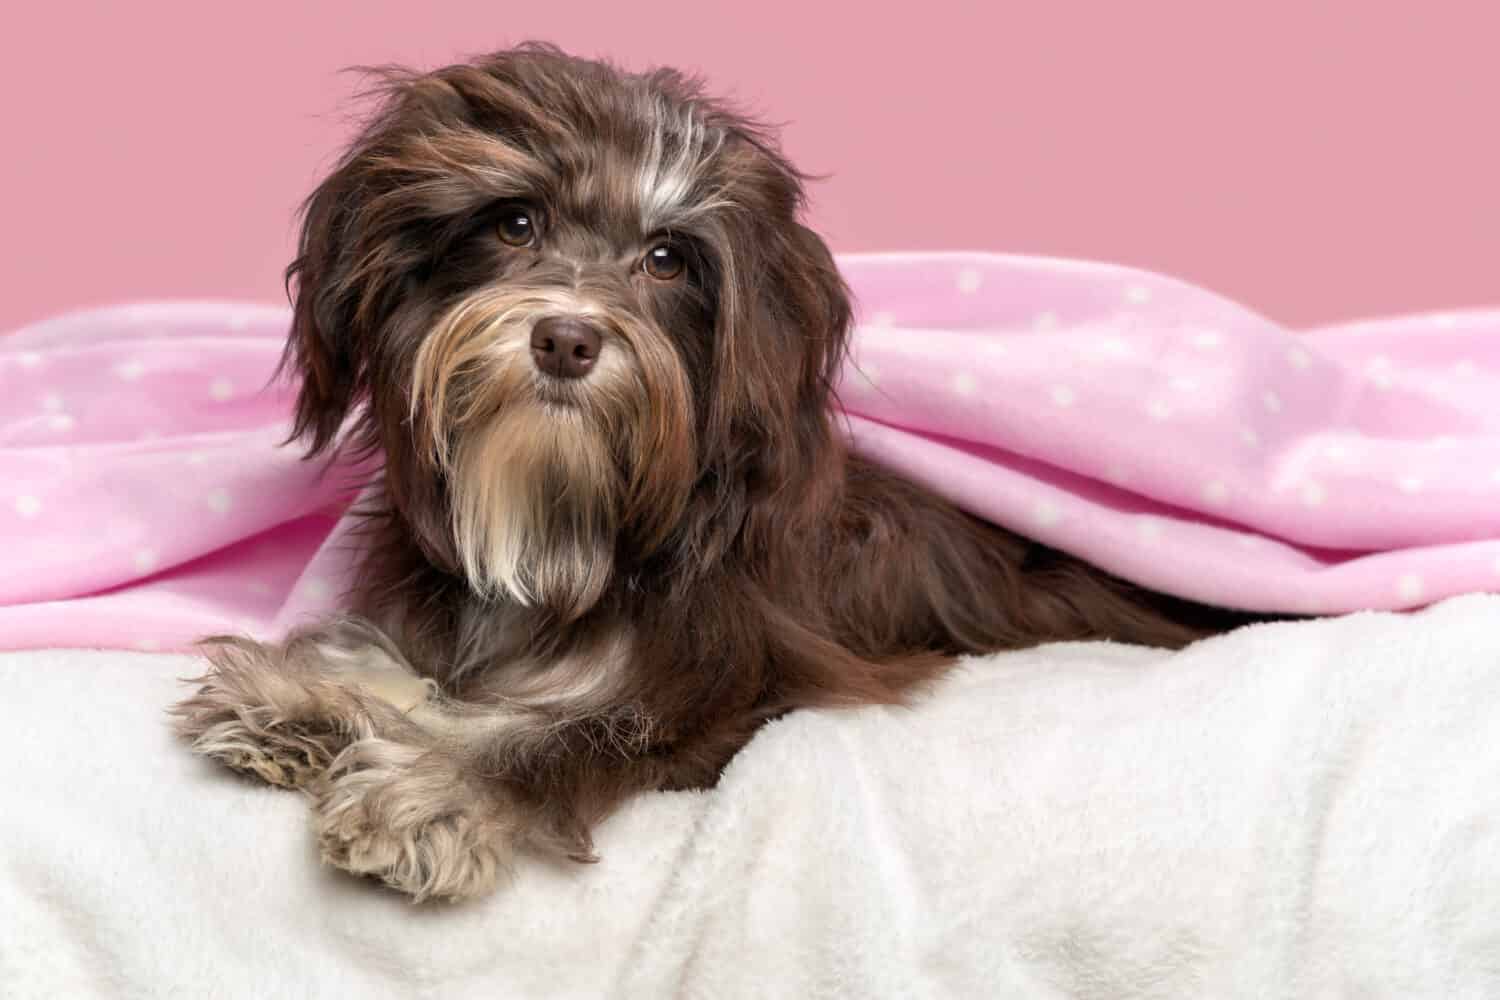 Cute lying chocolate Havanese dog in a bed under a pink blanket, before a mauve background